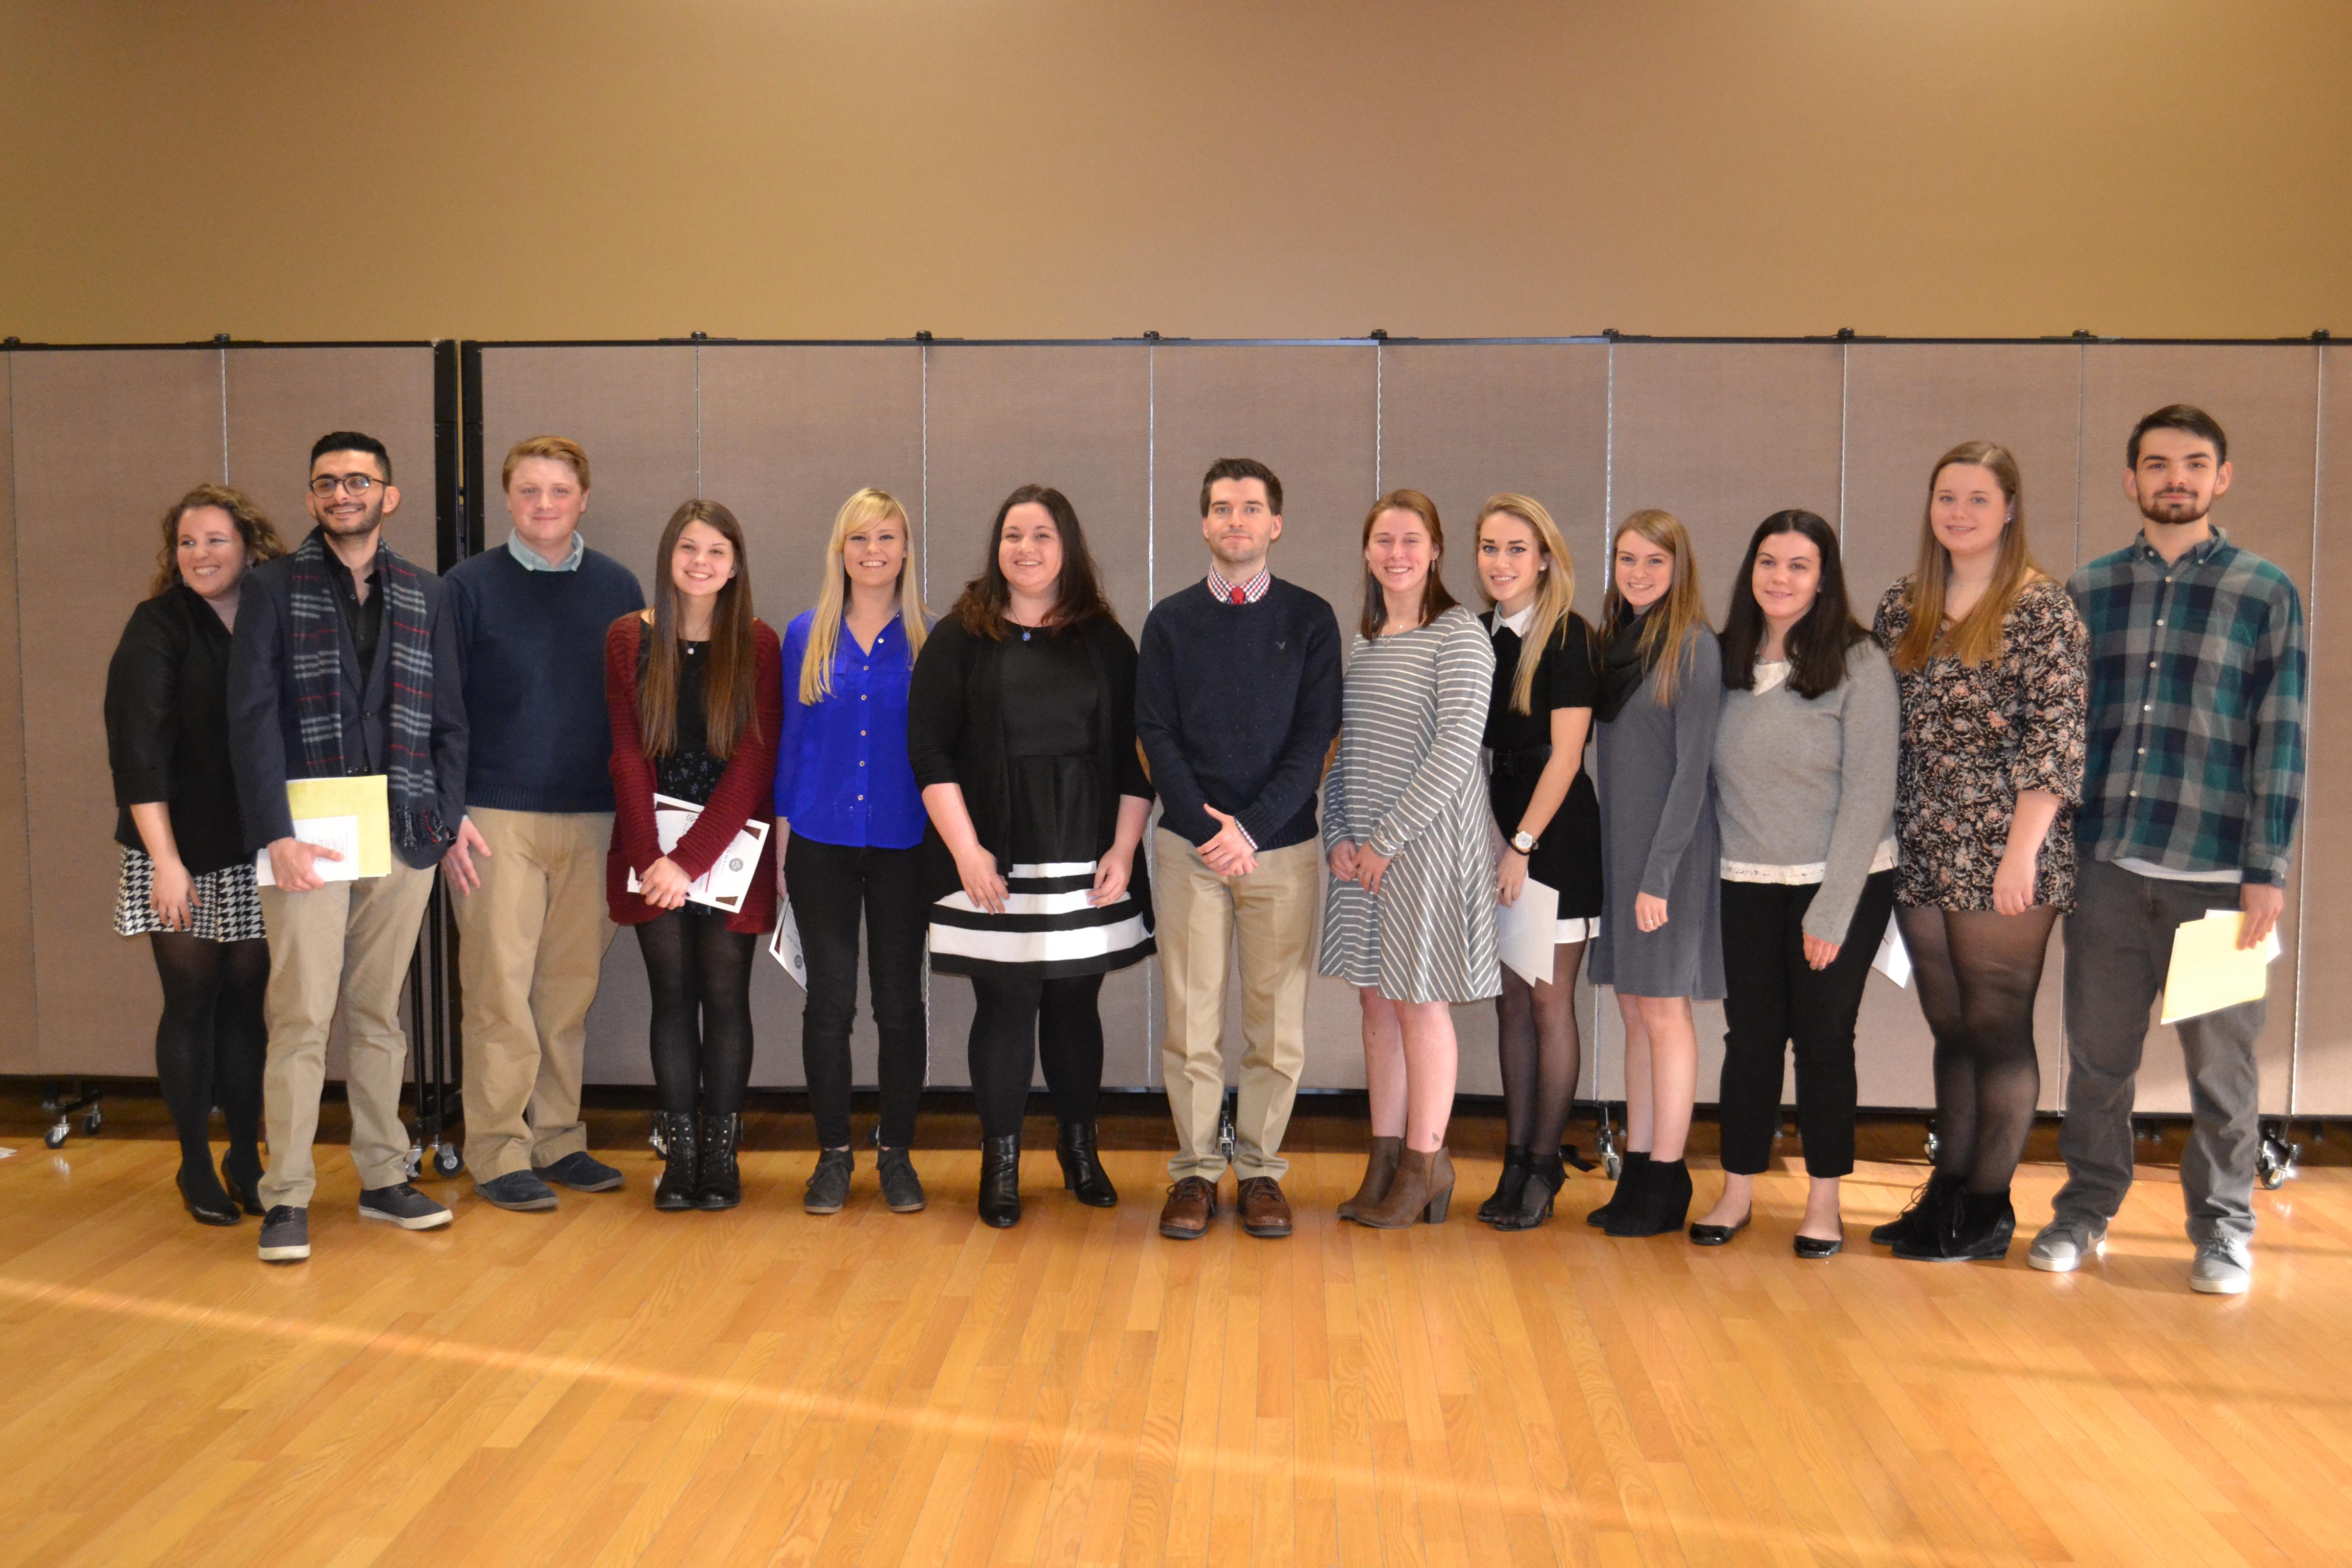 2017 SCJ inductees Future Advertising, Public Relations, and Journalism Professionals are inducted into the University's Chapters